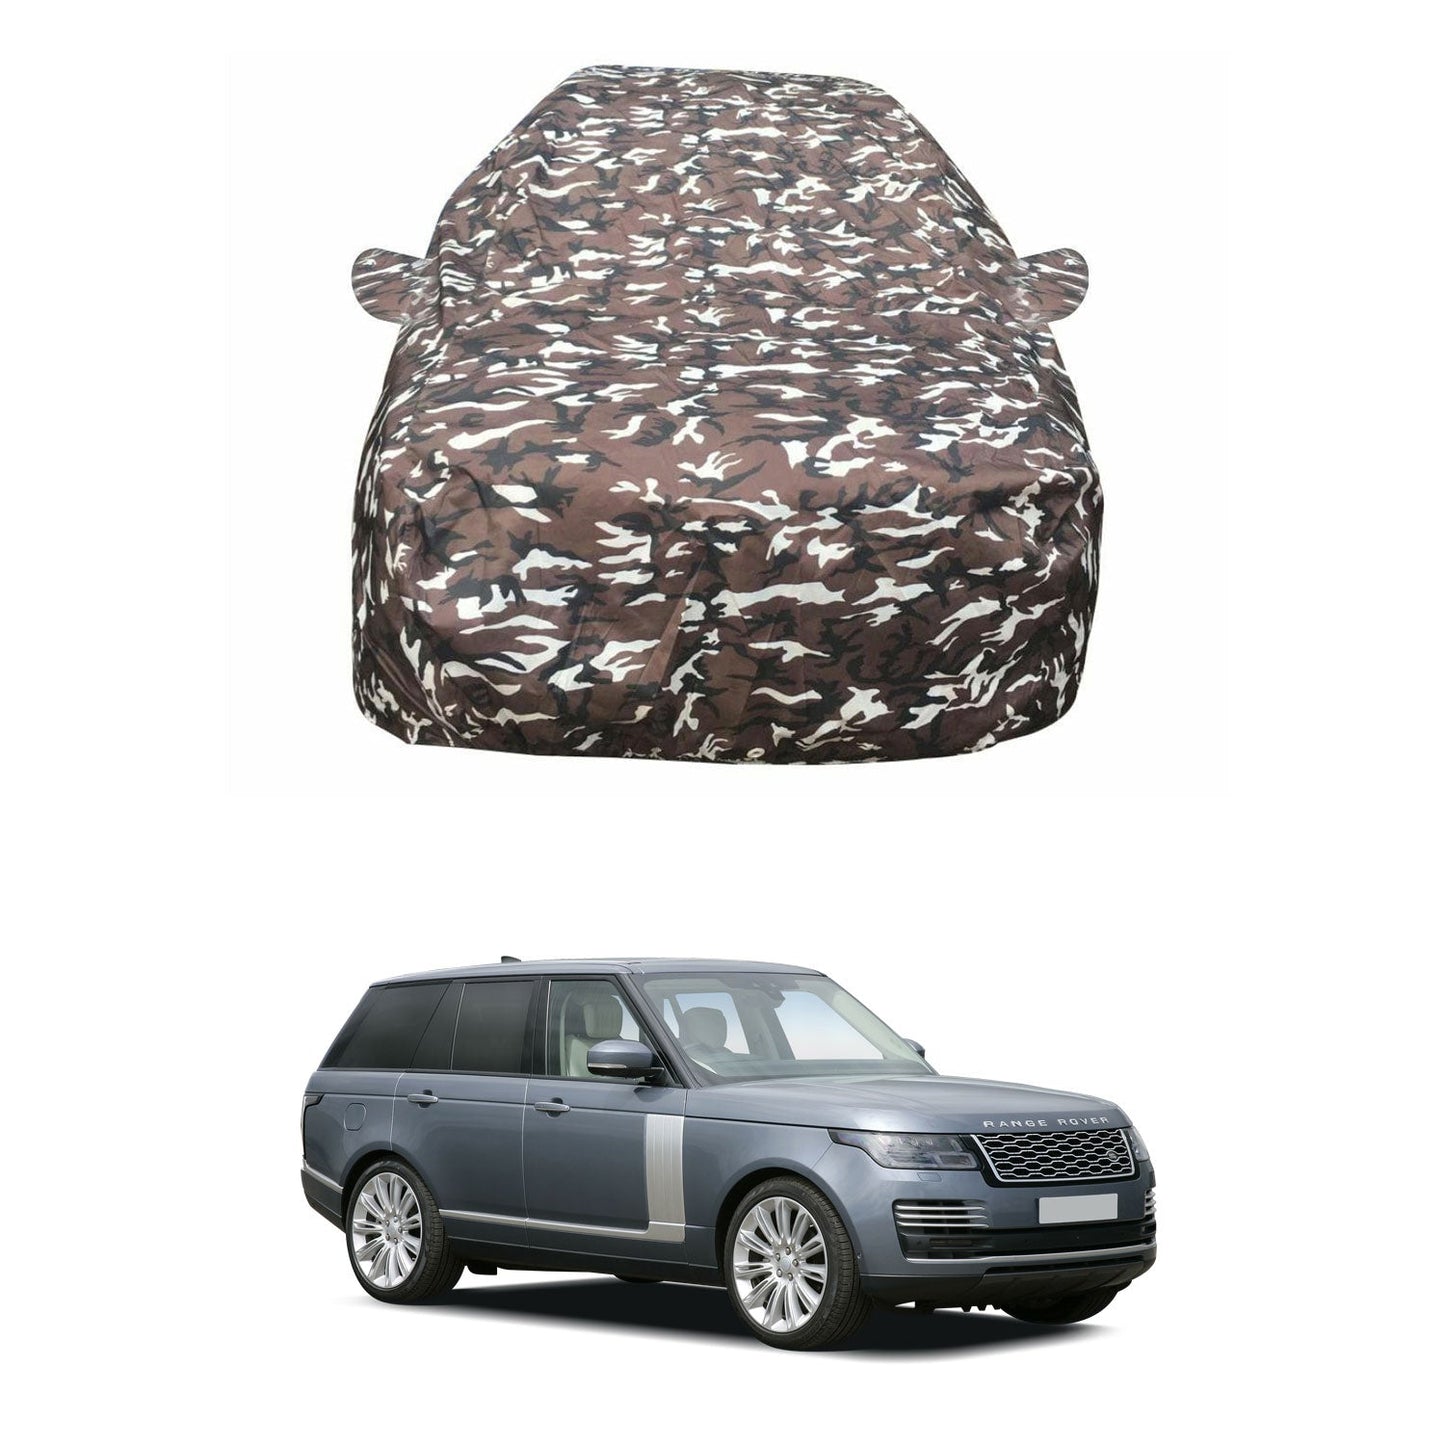 Oshotto Ranger Design Made of 100% Waterproof Fabric Car Body Cover with Mirror Pockets For Range Rover Vogue